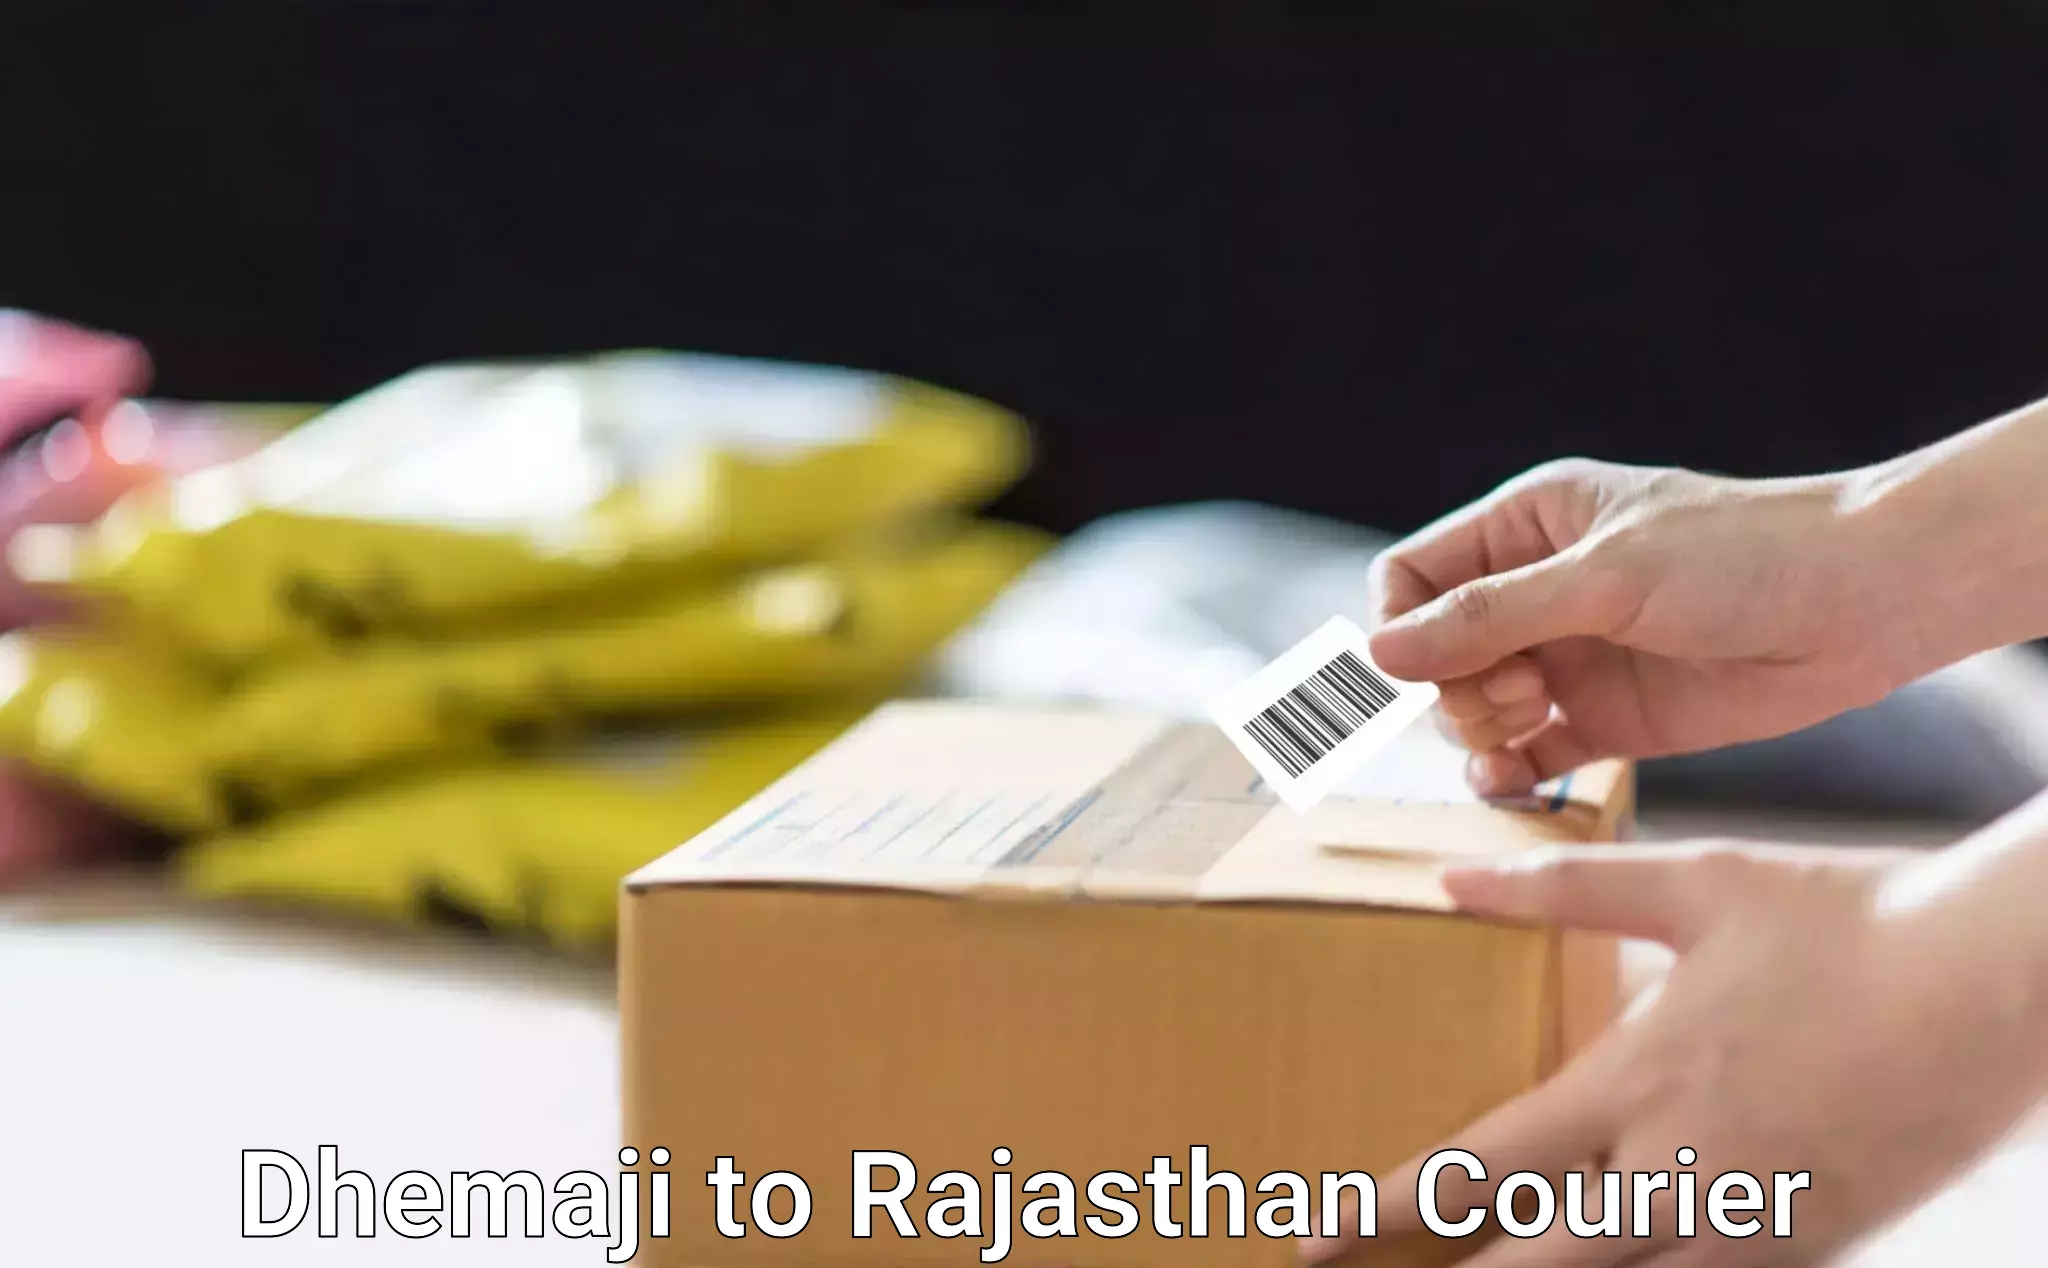 Courier app Dhemaji to Rajasthan